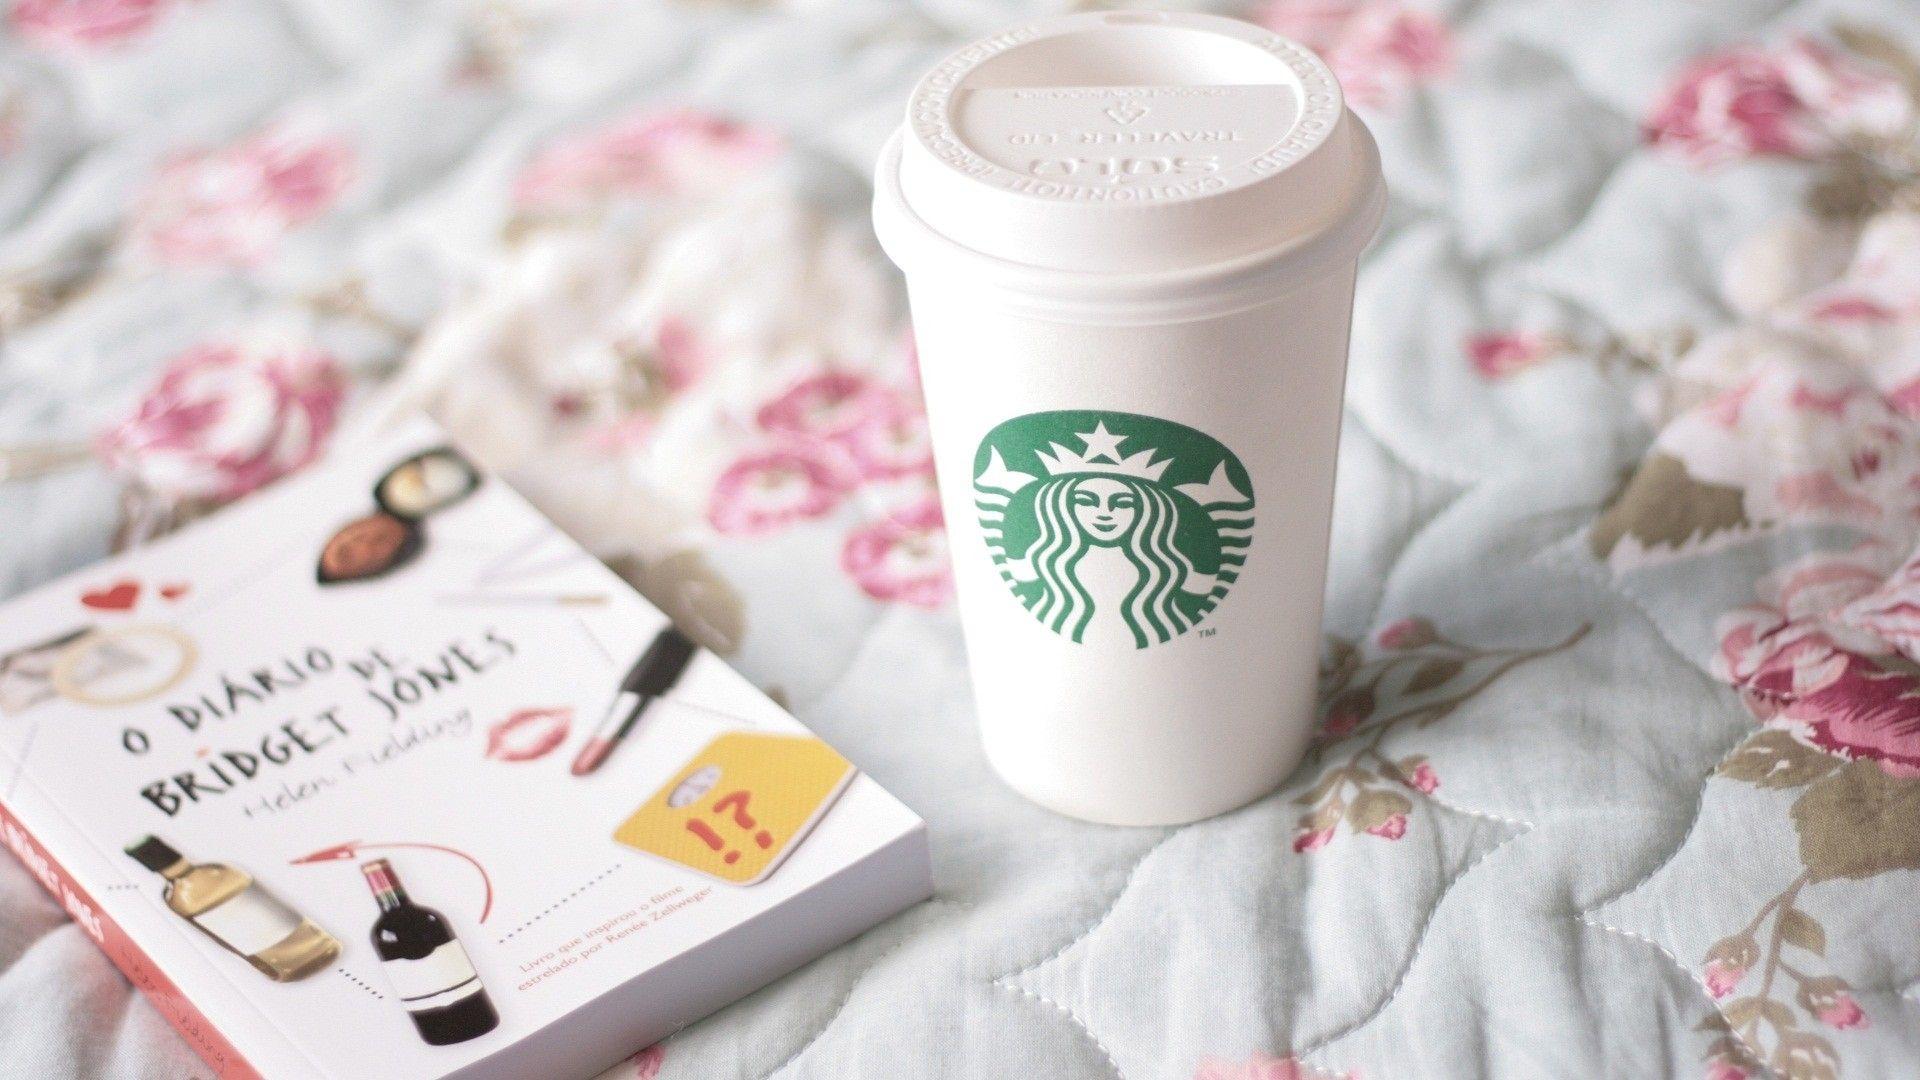 Wallpaper Coffee, Starbucks, Book, Bed linen, Mood HD, Picture, Image